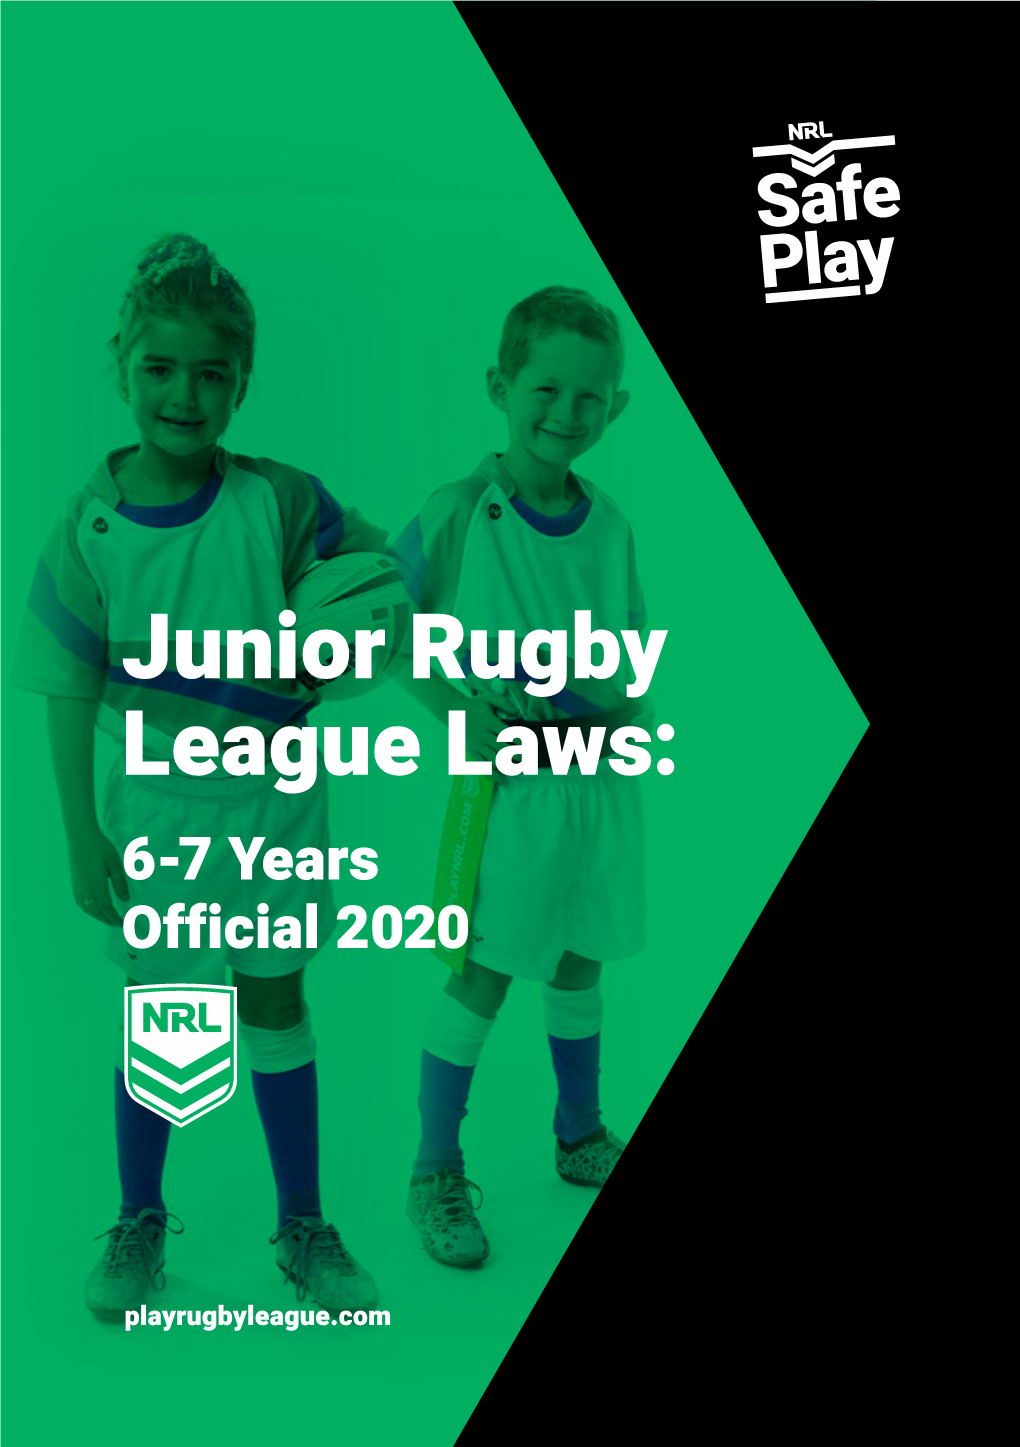 Junior Rugby League Laws: 6-7 Years Official 2020